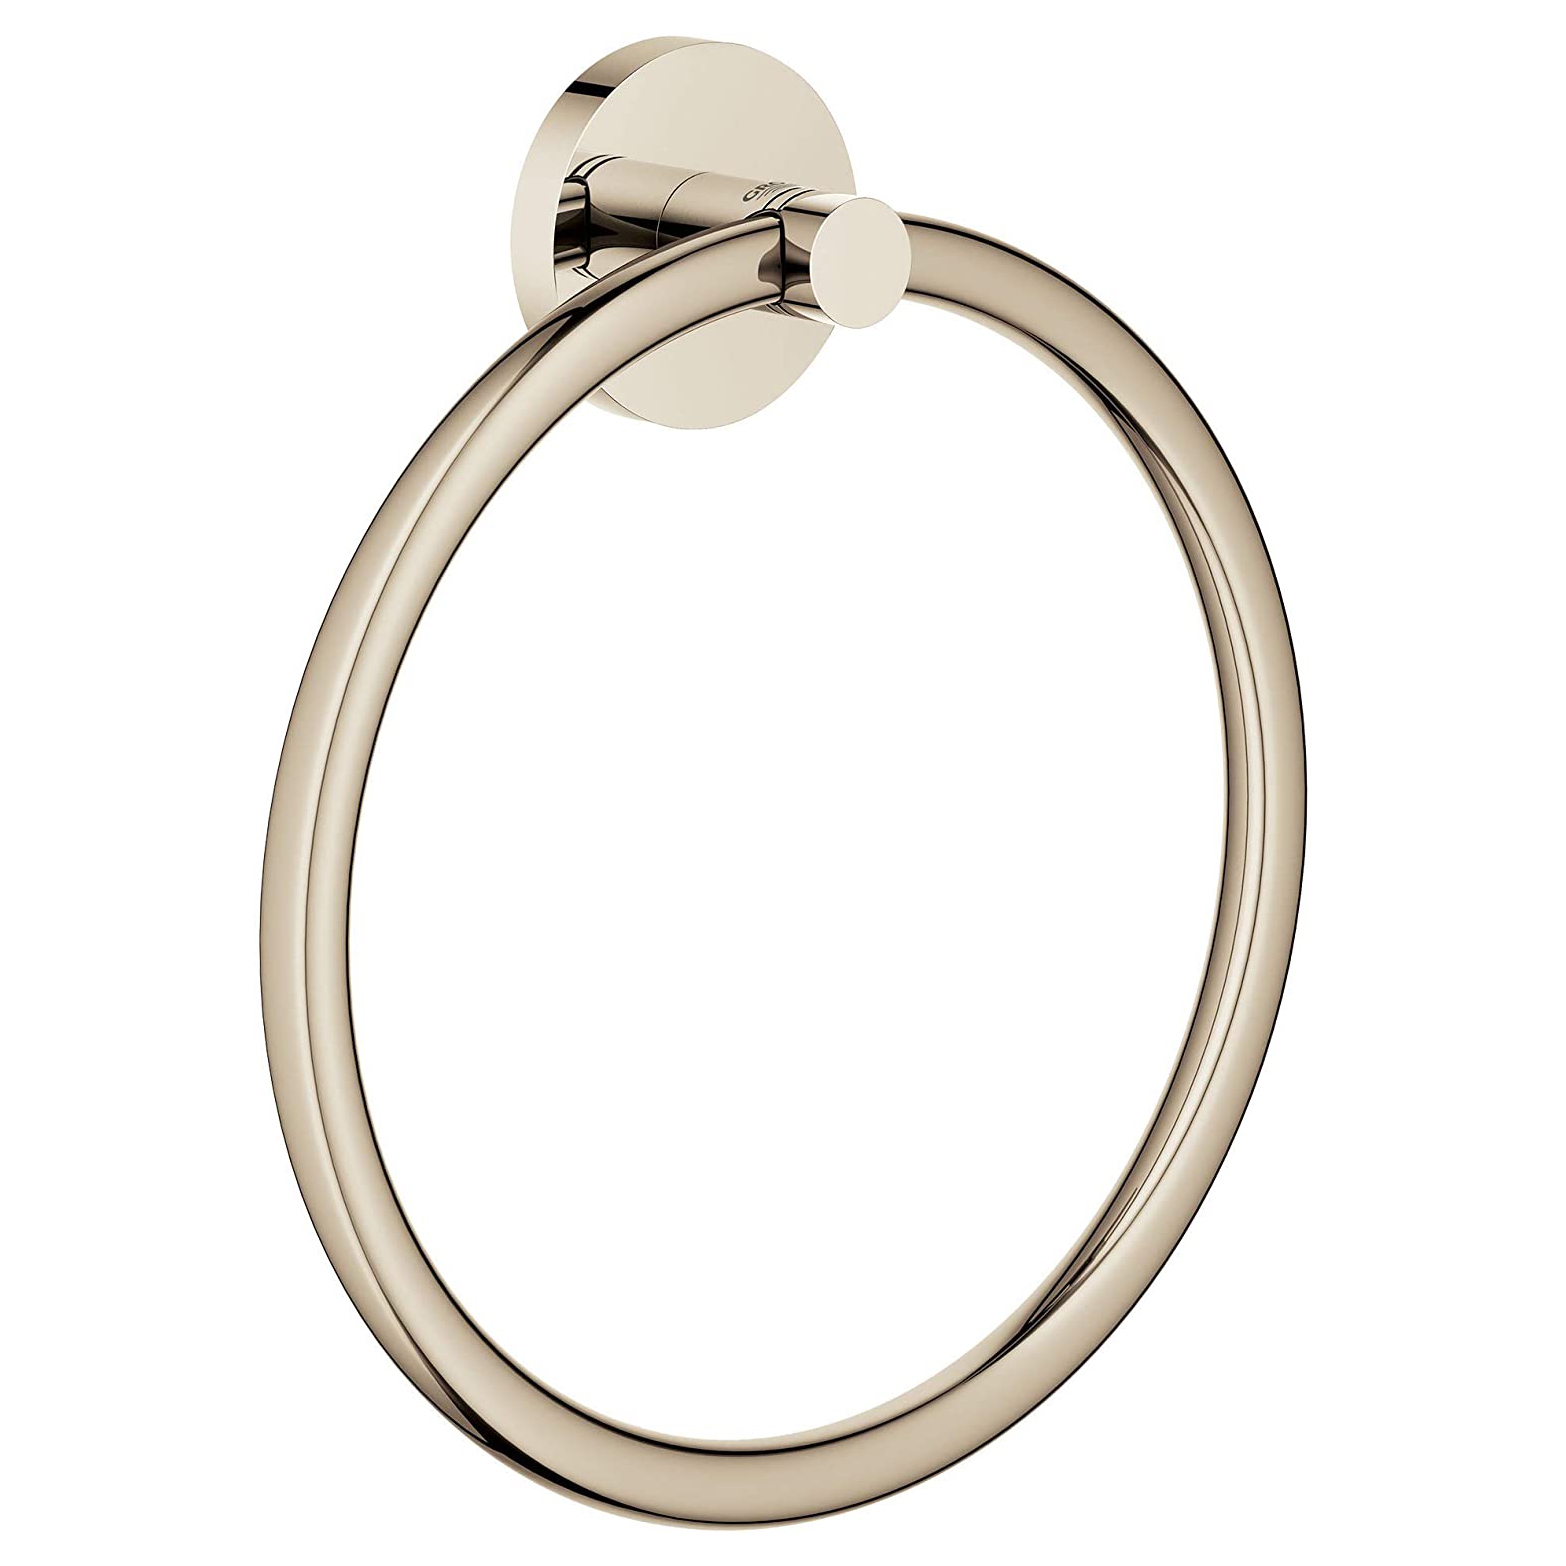 Essentials 7-1/16" Towel Ring in Polished Nickel